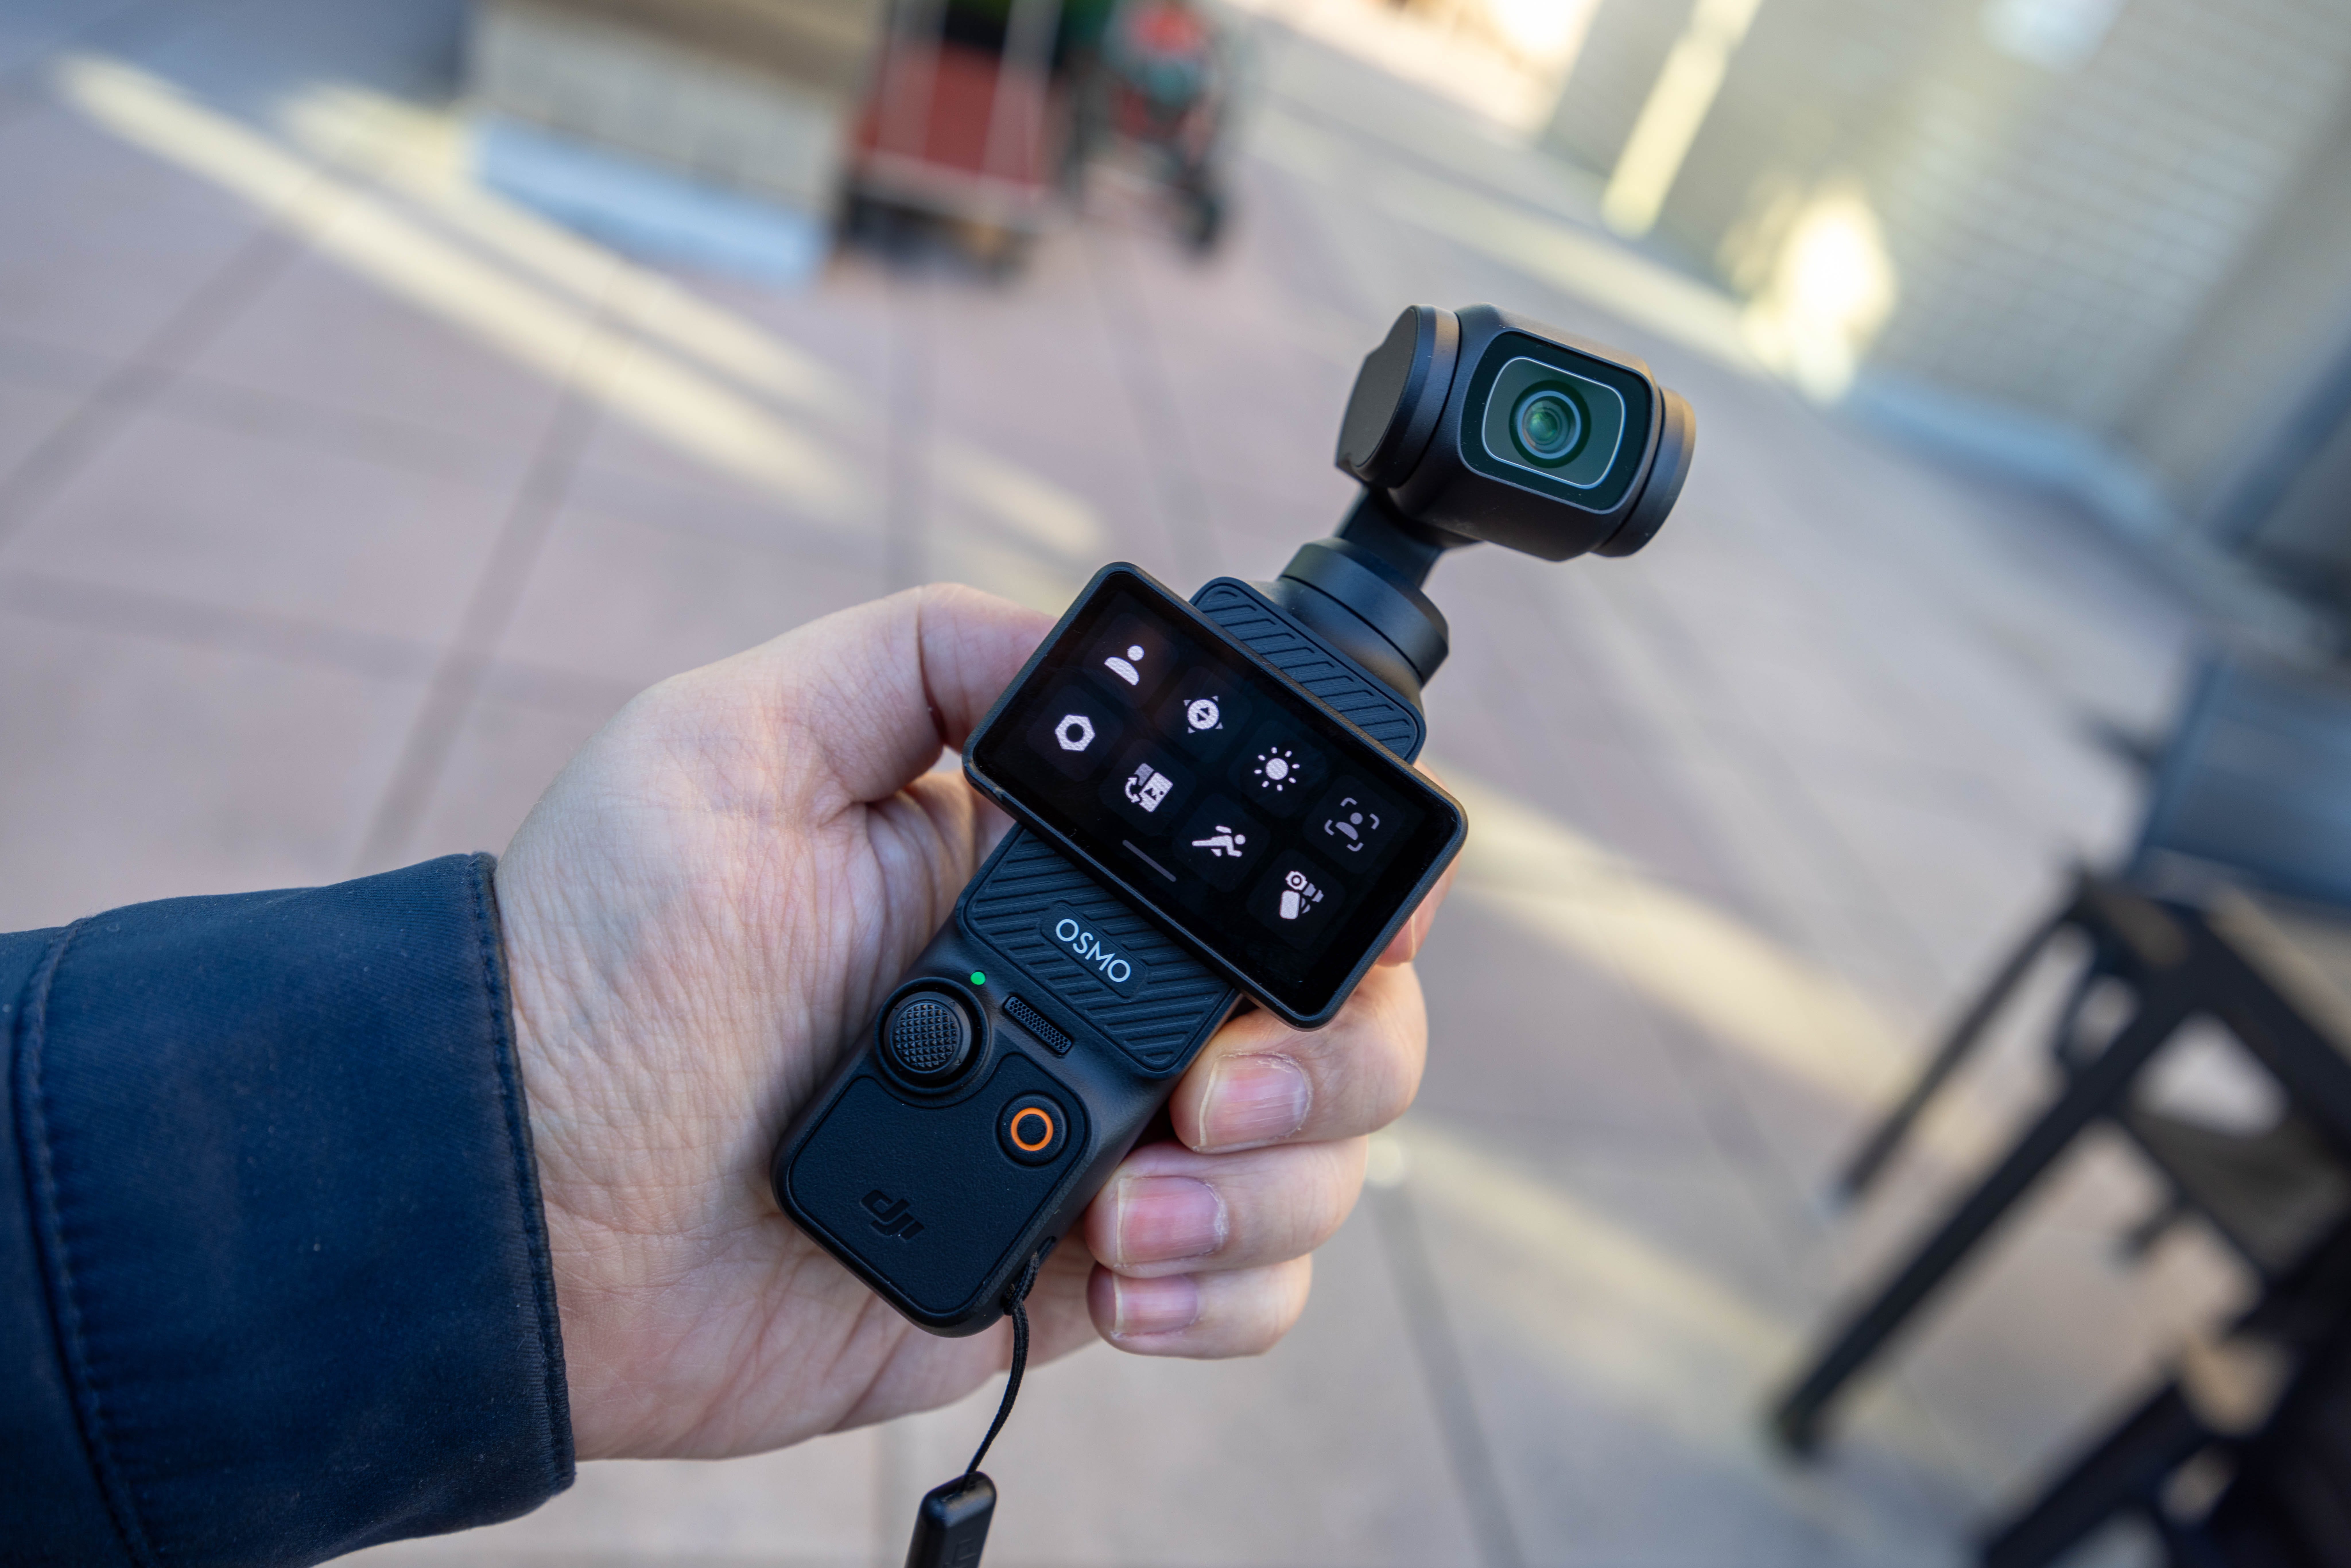 5 things I don't like about the DJI Osmo Pocket 3